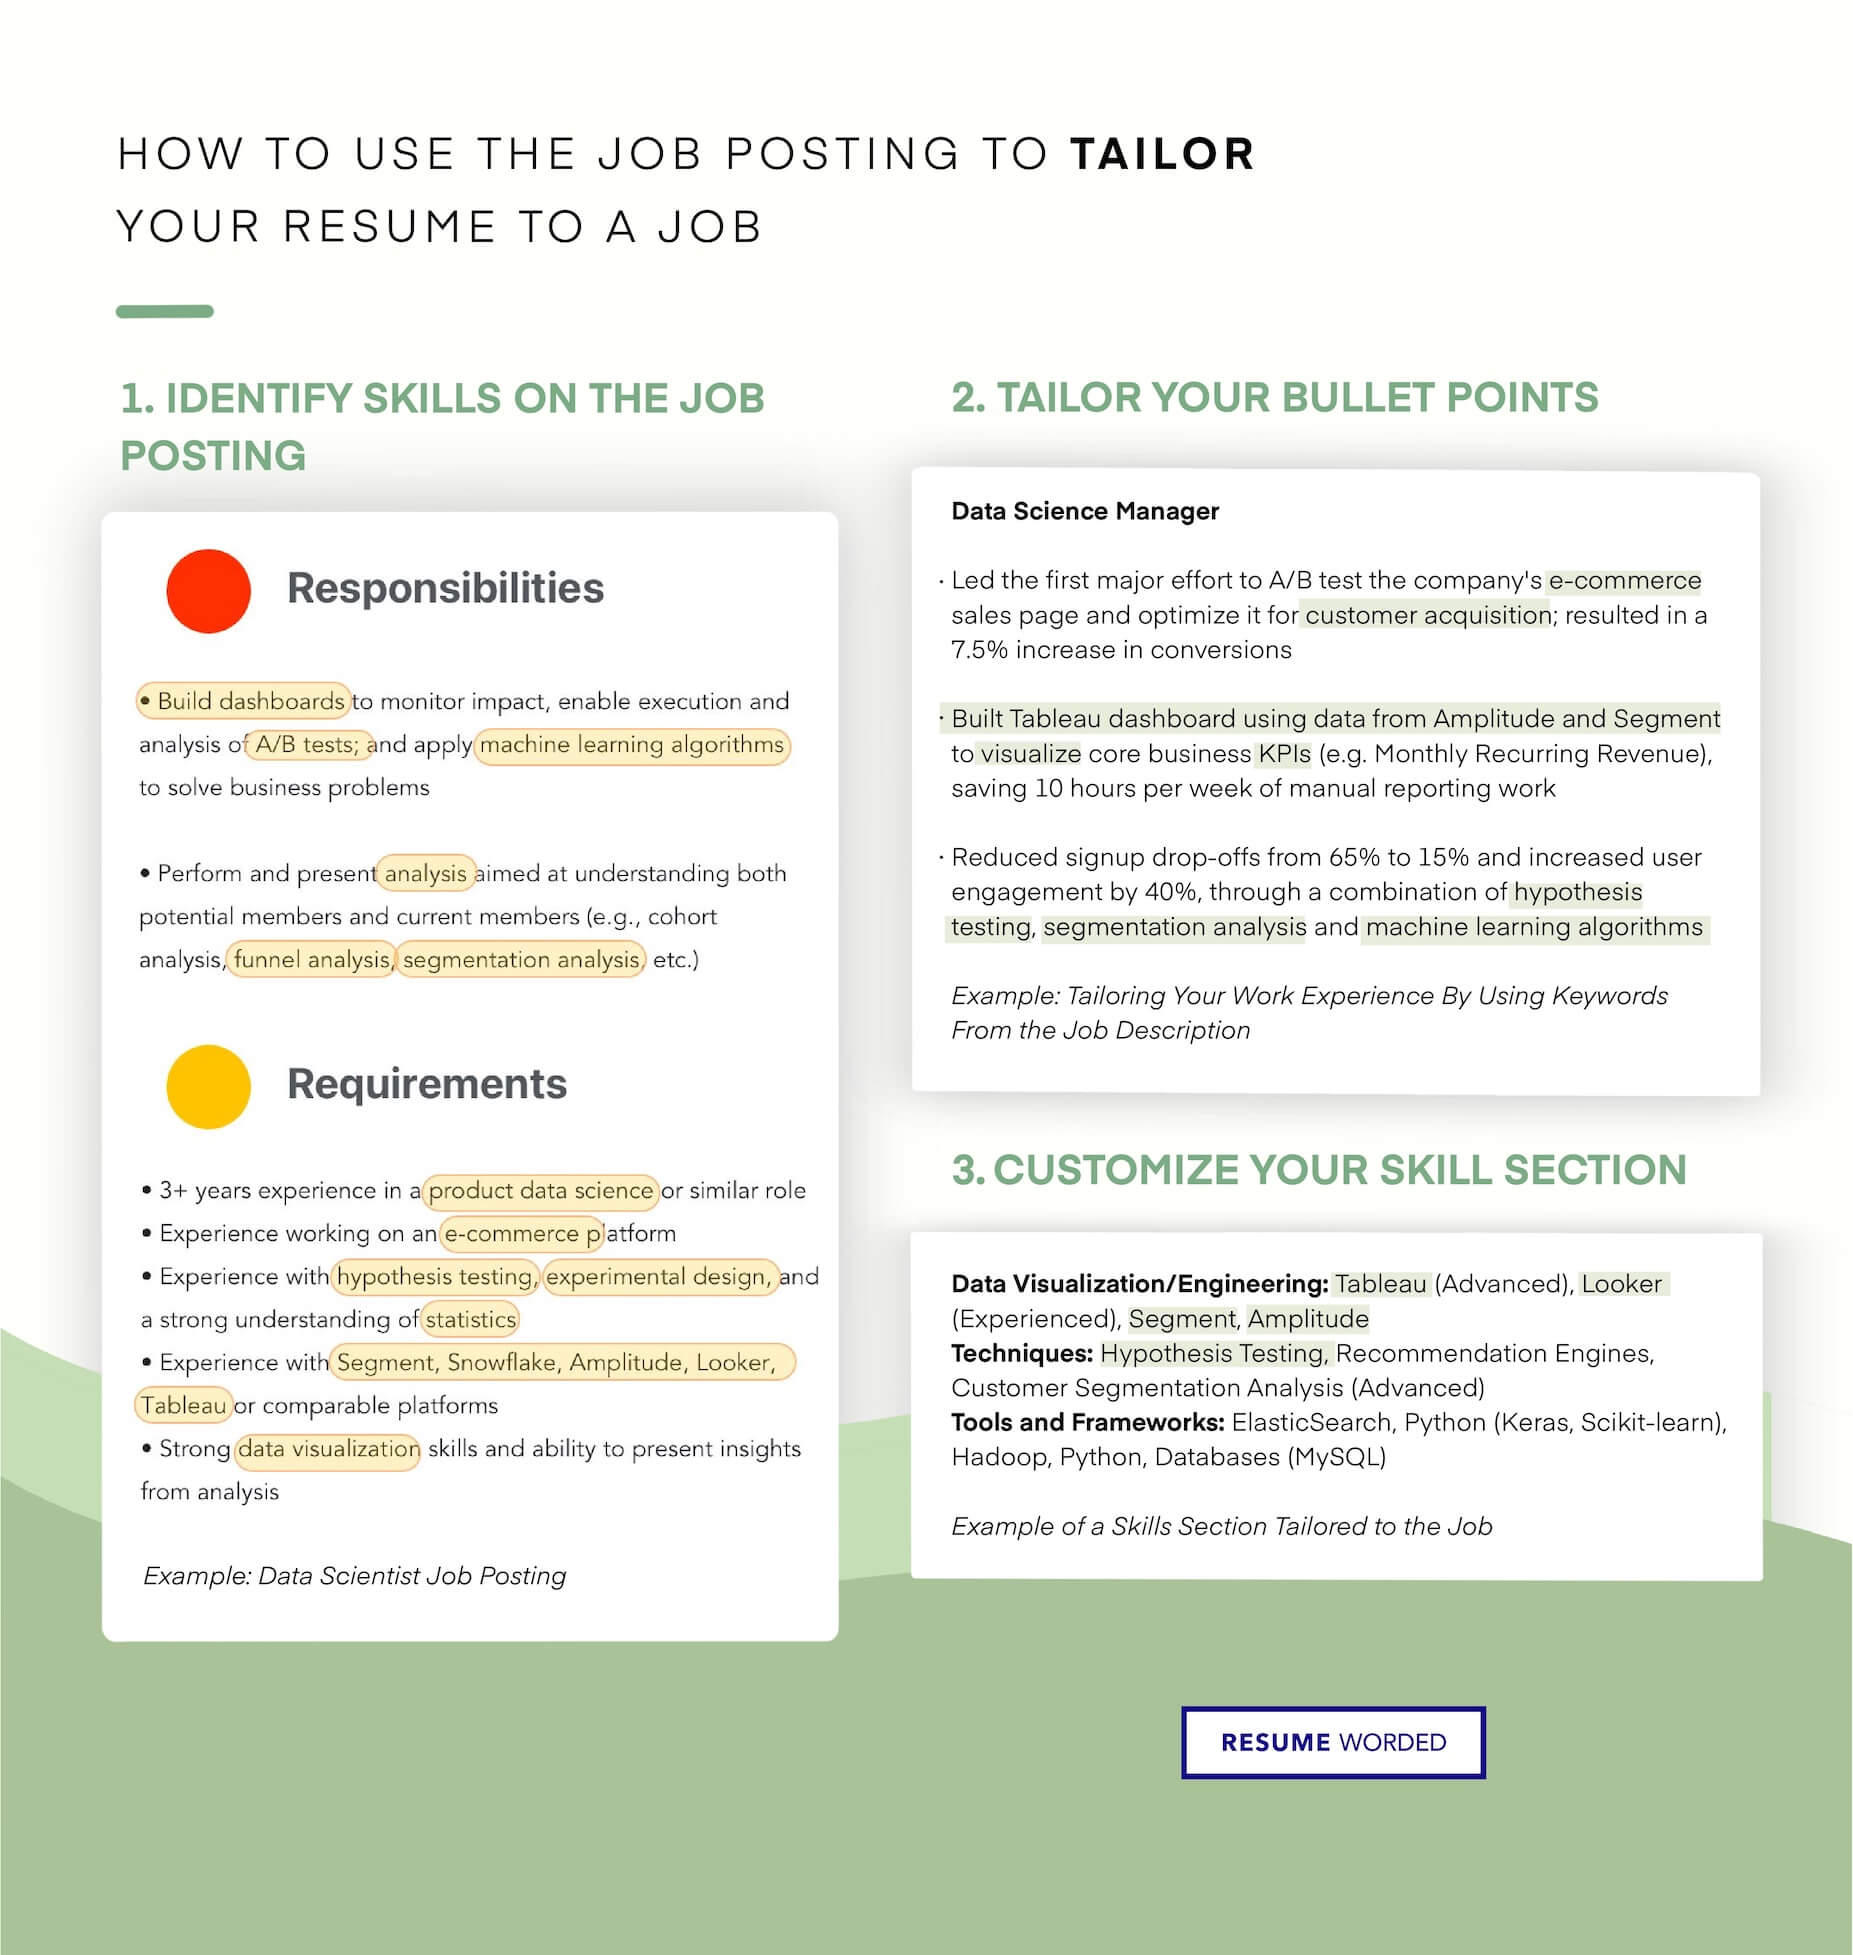 Tailor your resume to the transmission planning field. - Transmission Planning Engineer  Resume